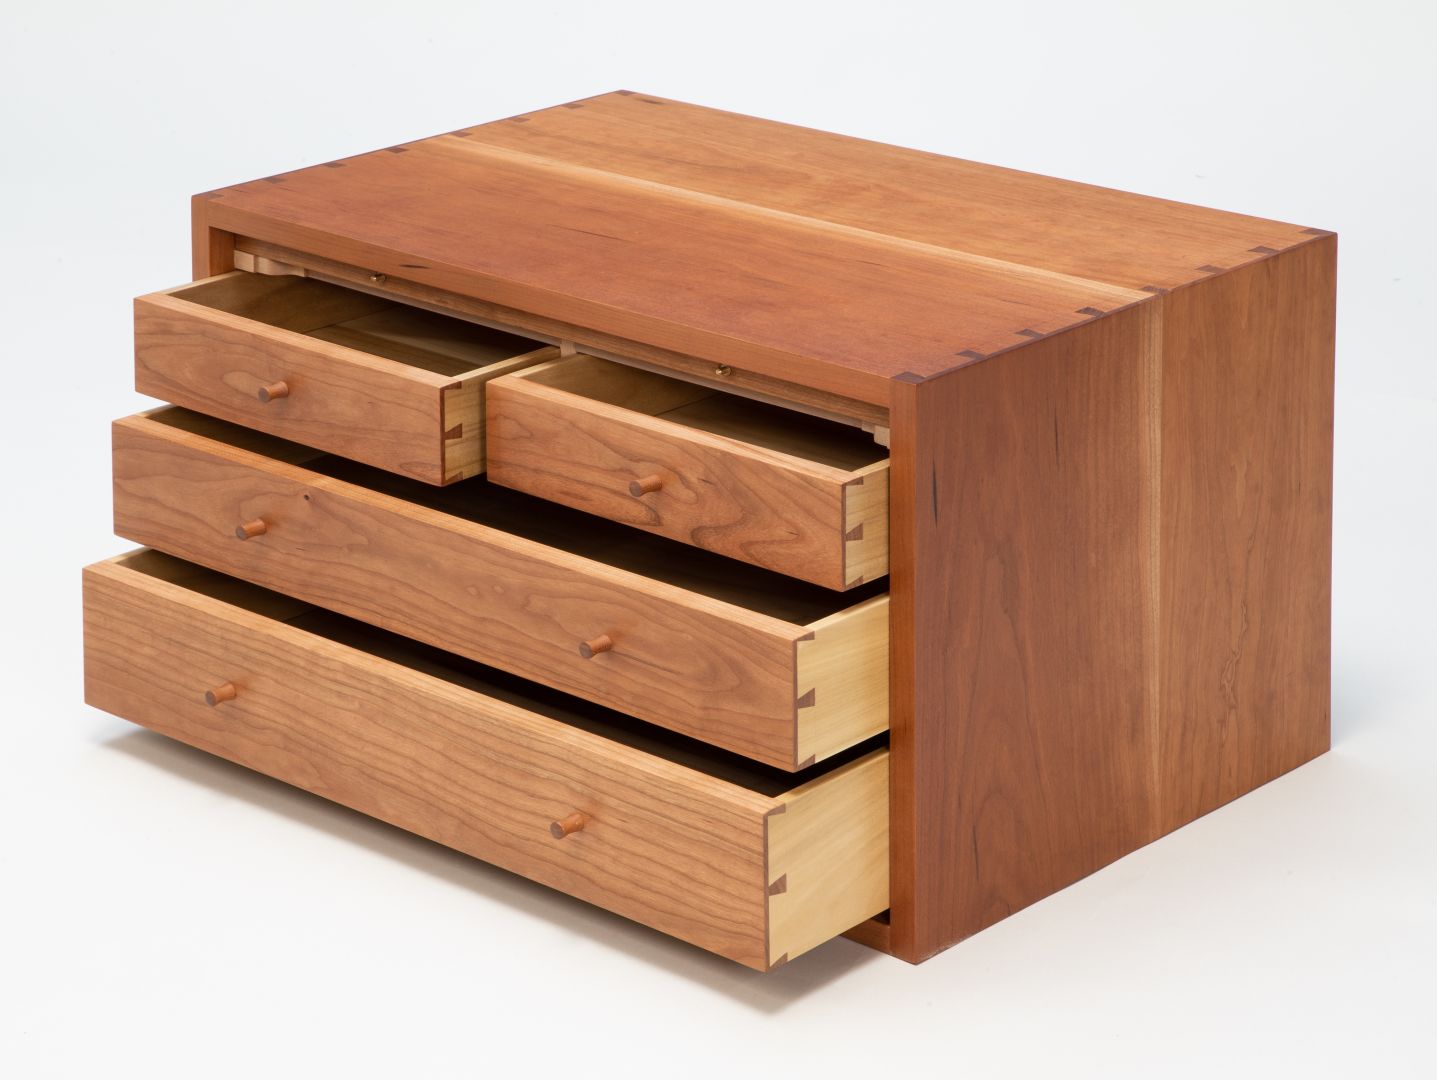 Toolbox by by Emily Goff CF ’20